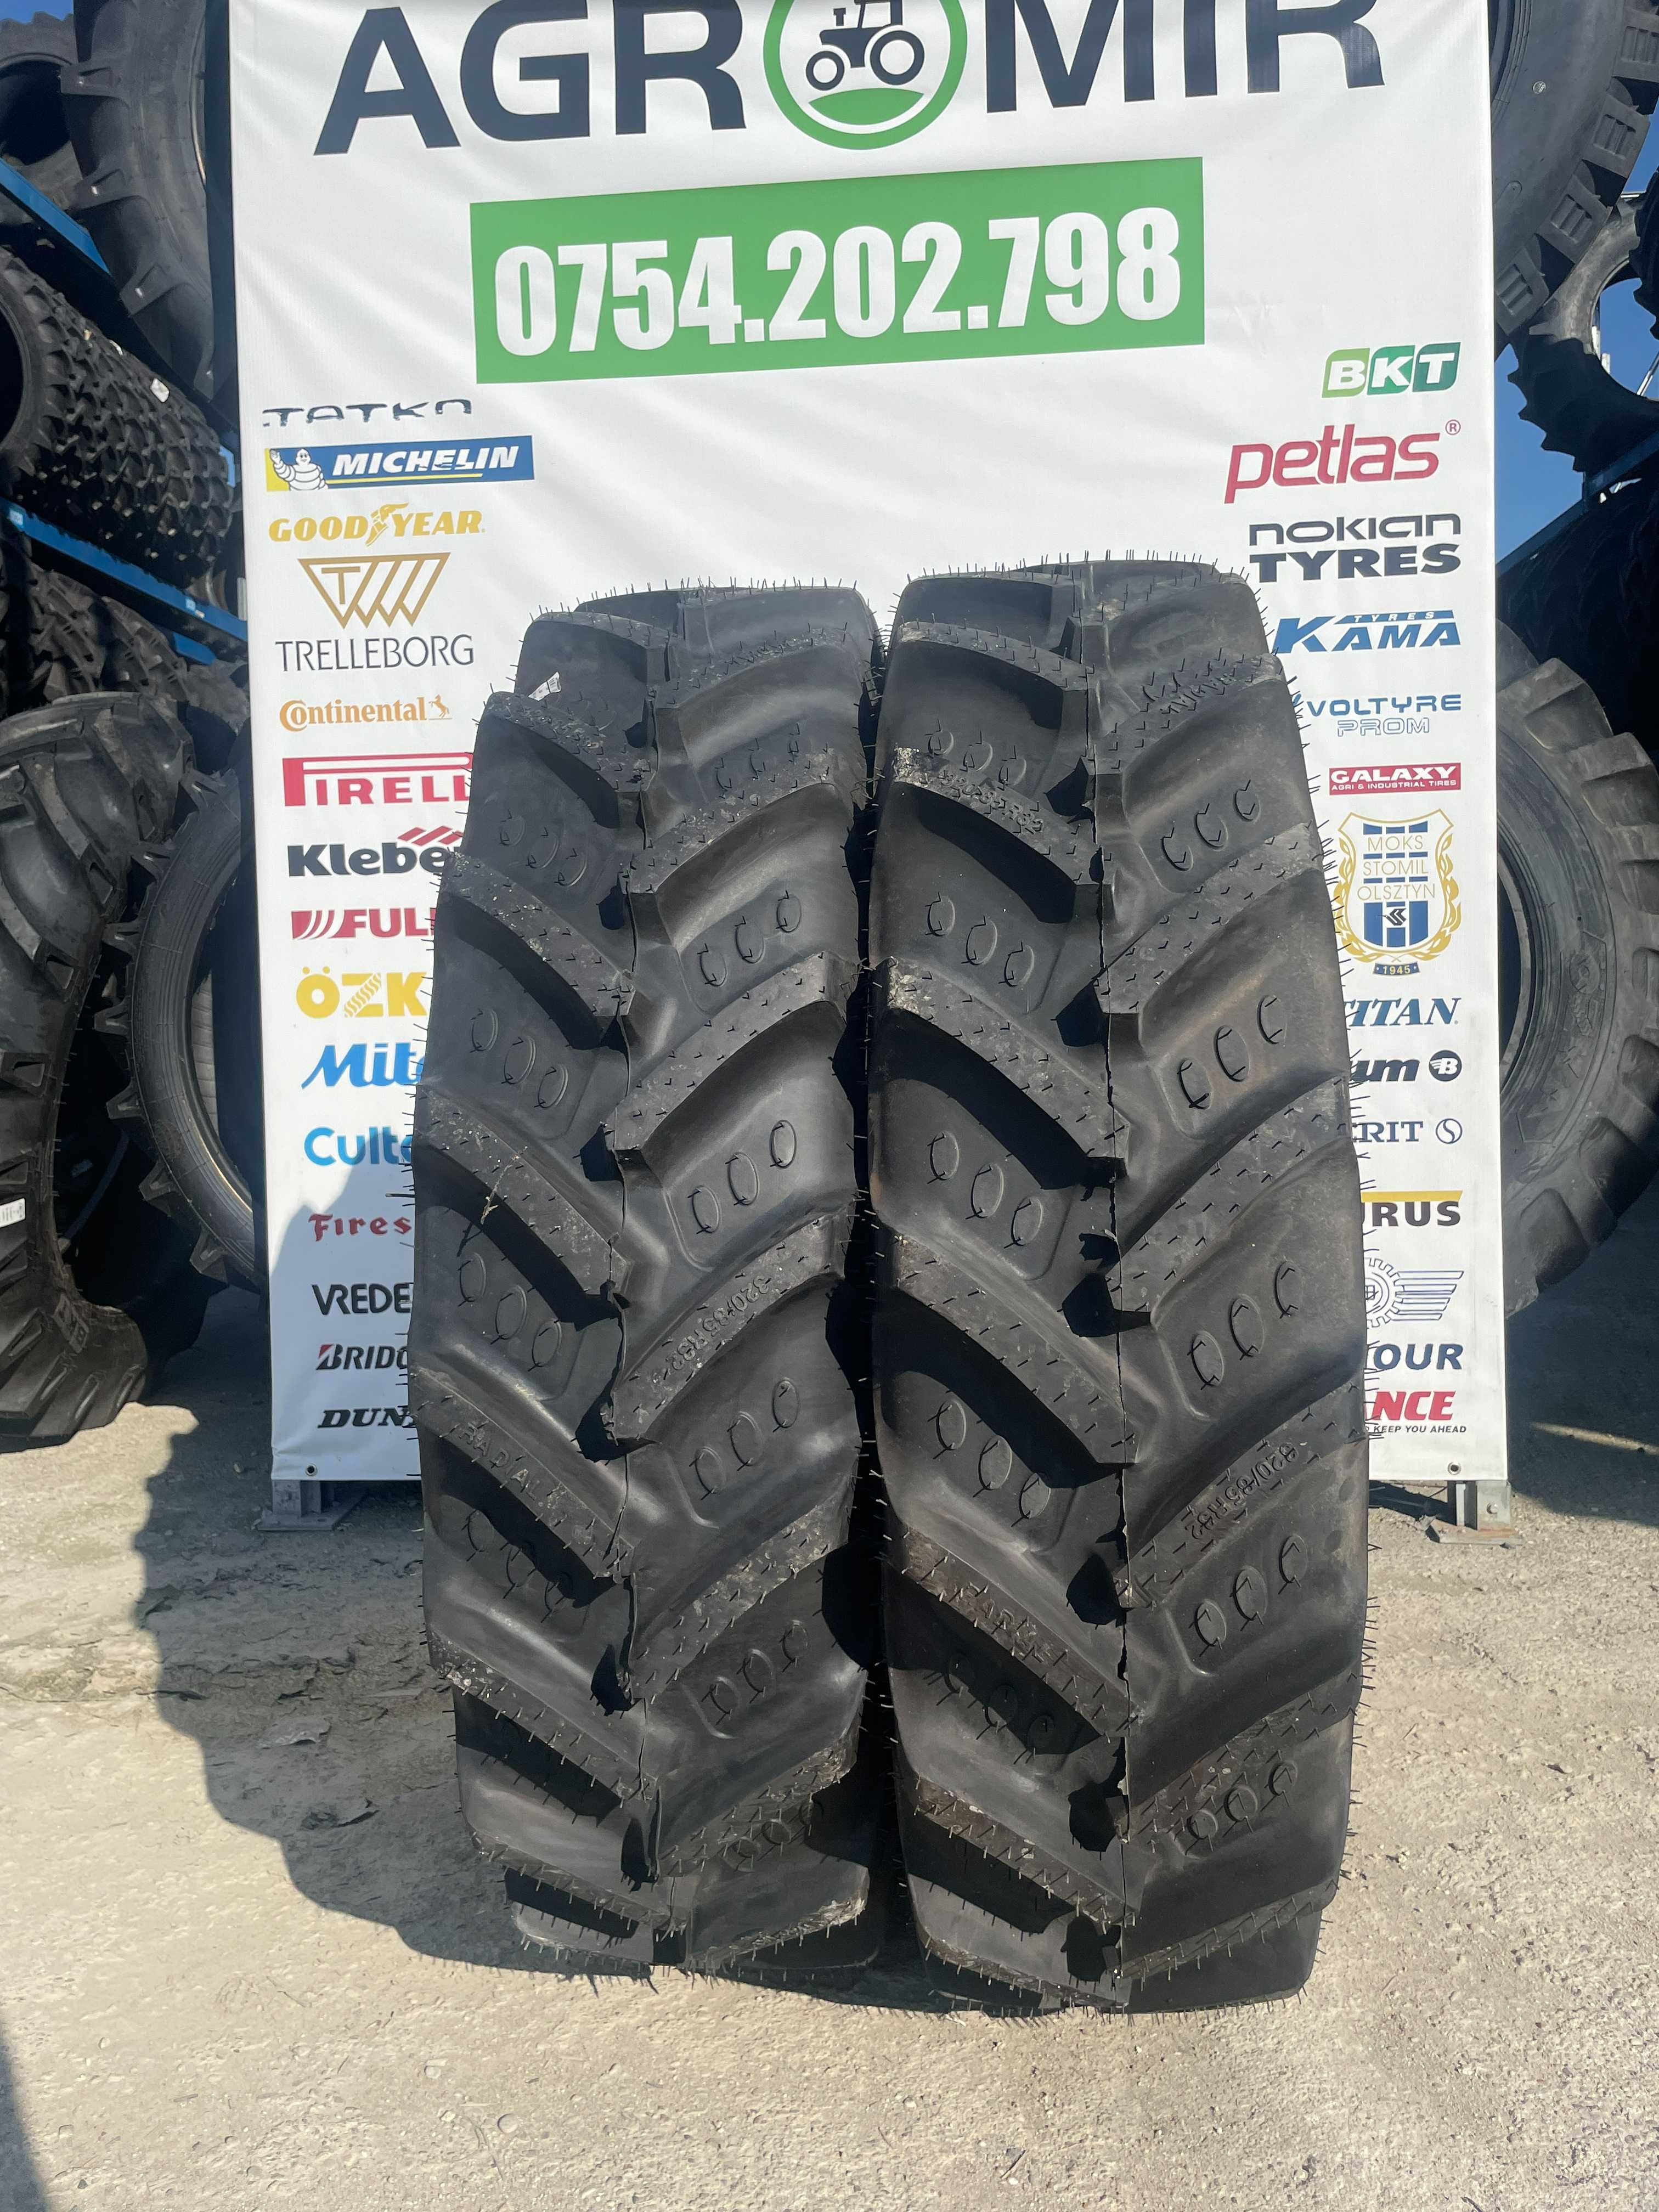 Anvelope noi agricole tractor spate protectie janta 12.4-32 320/85R32